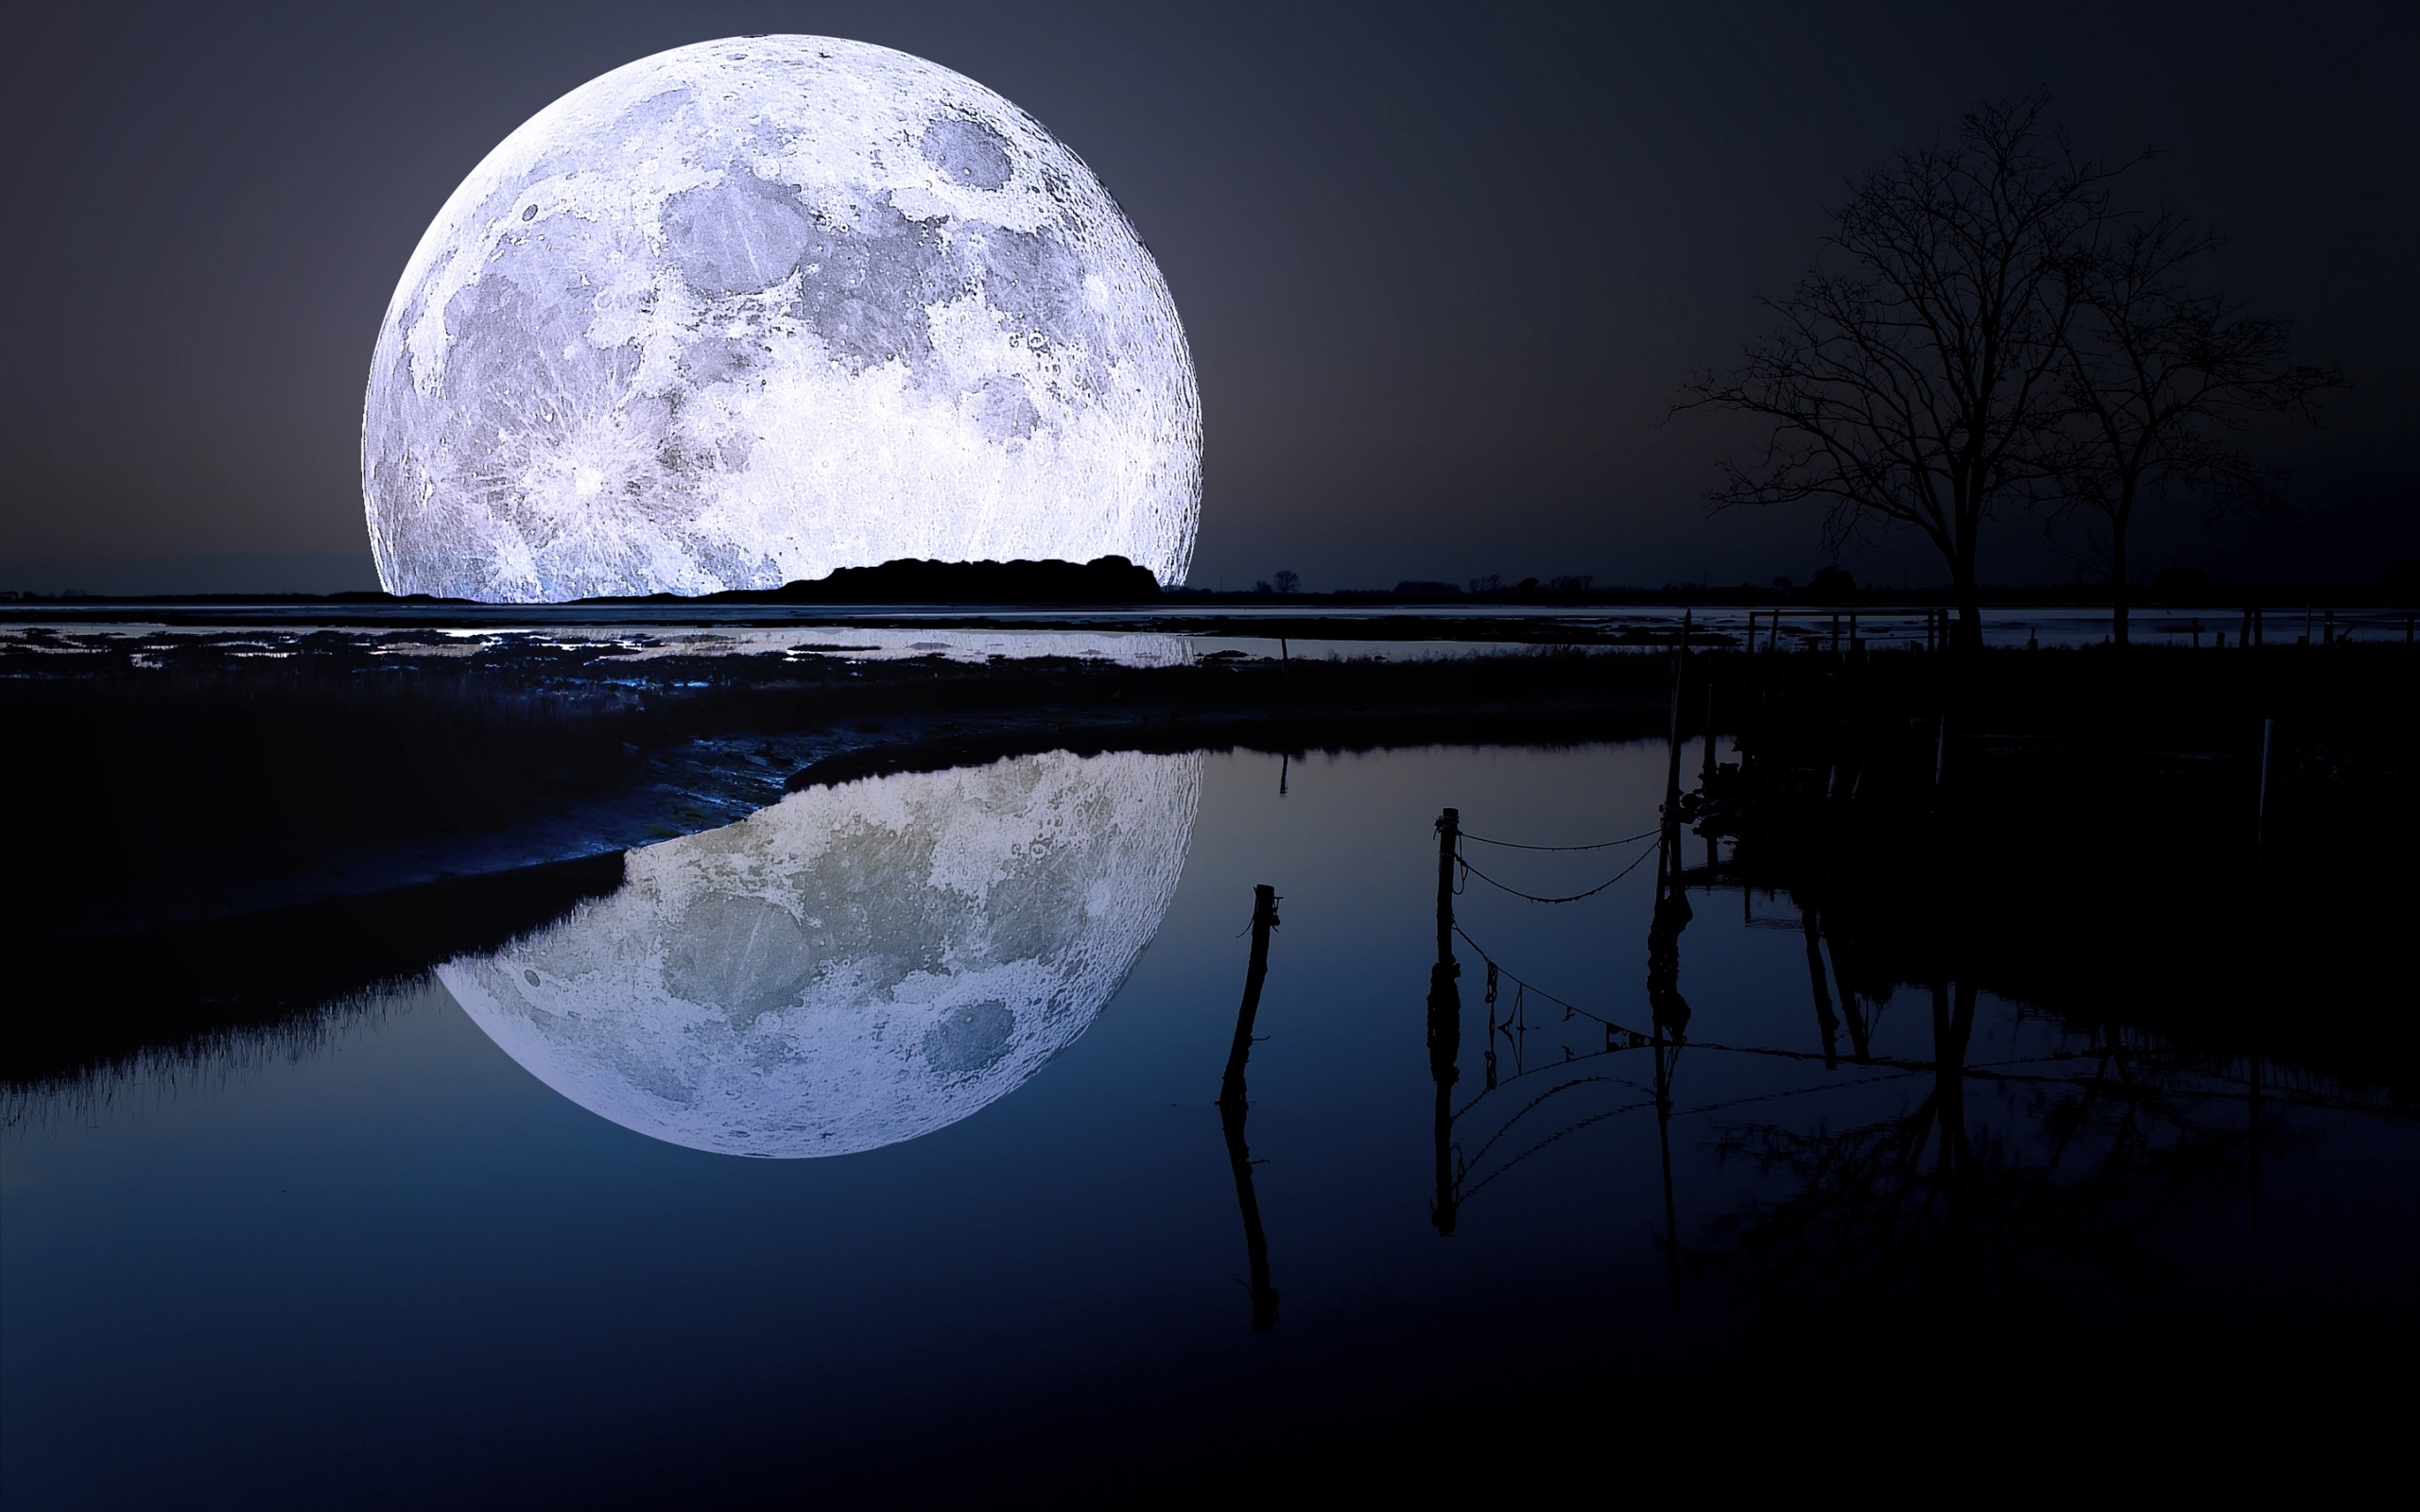 10 Top Beautiful Full Moon Wallpapers FULL HD 1920×1080 For PC Background